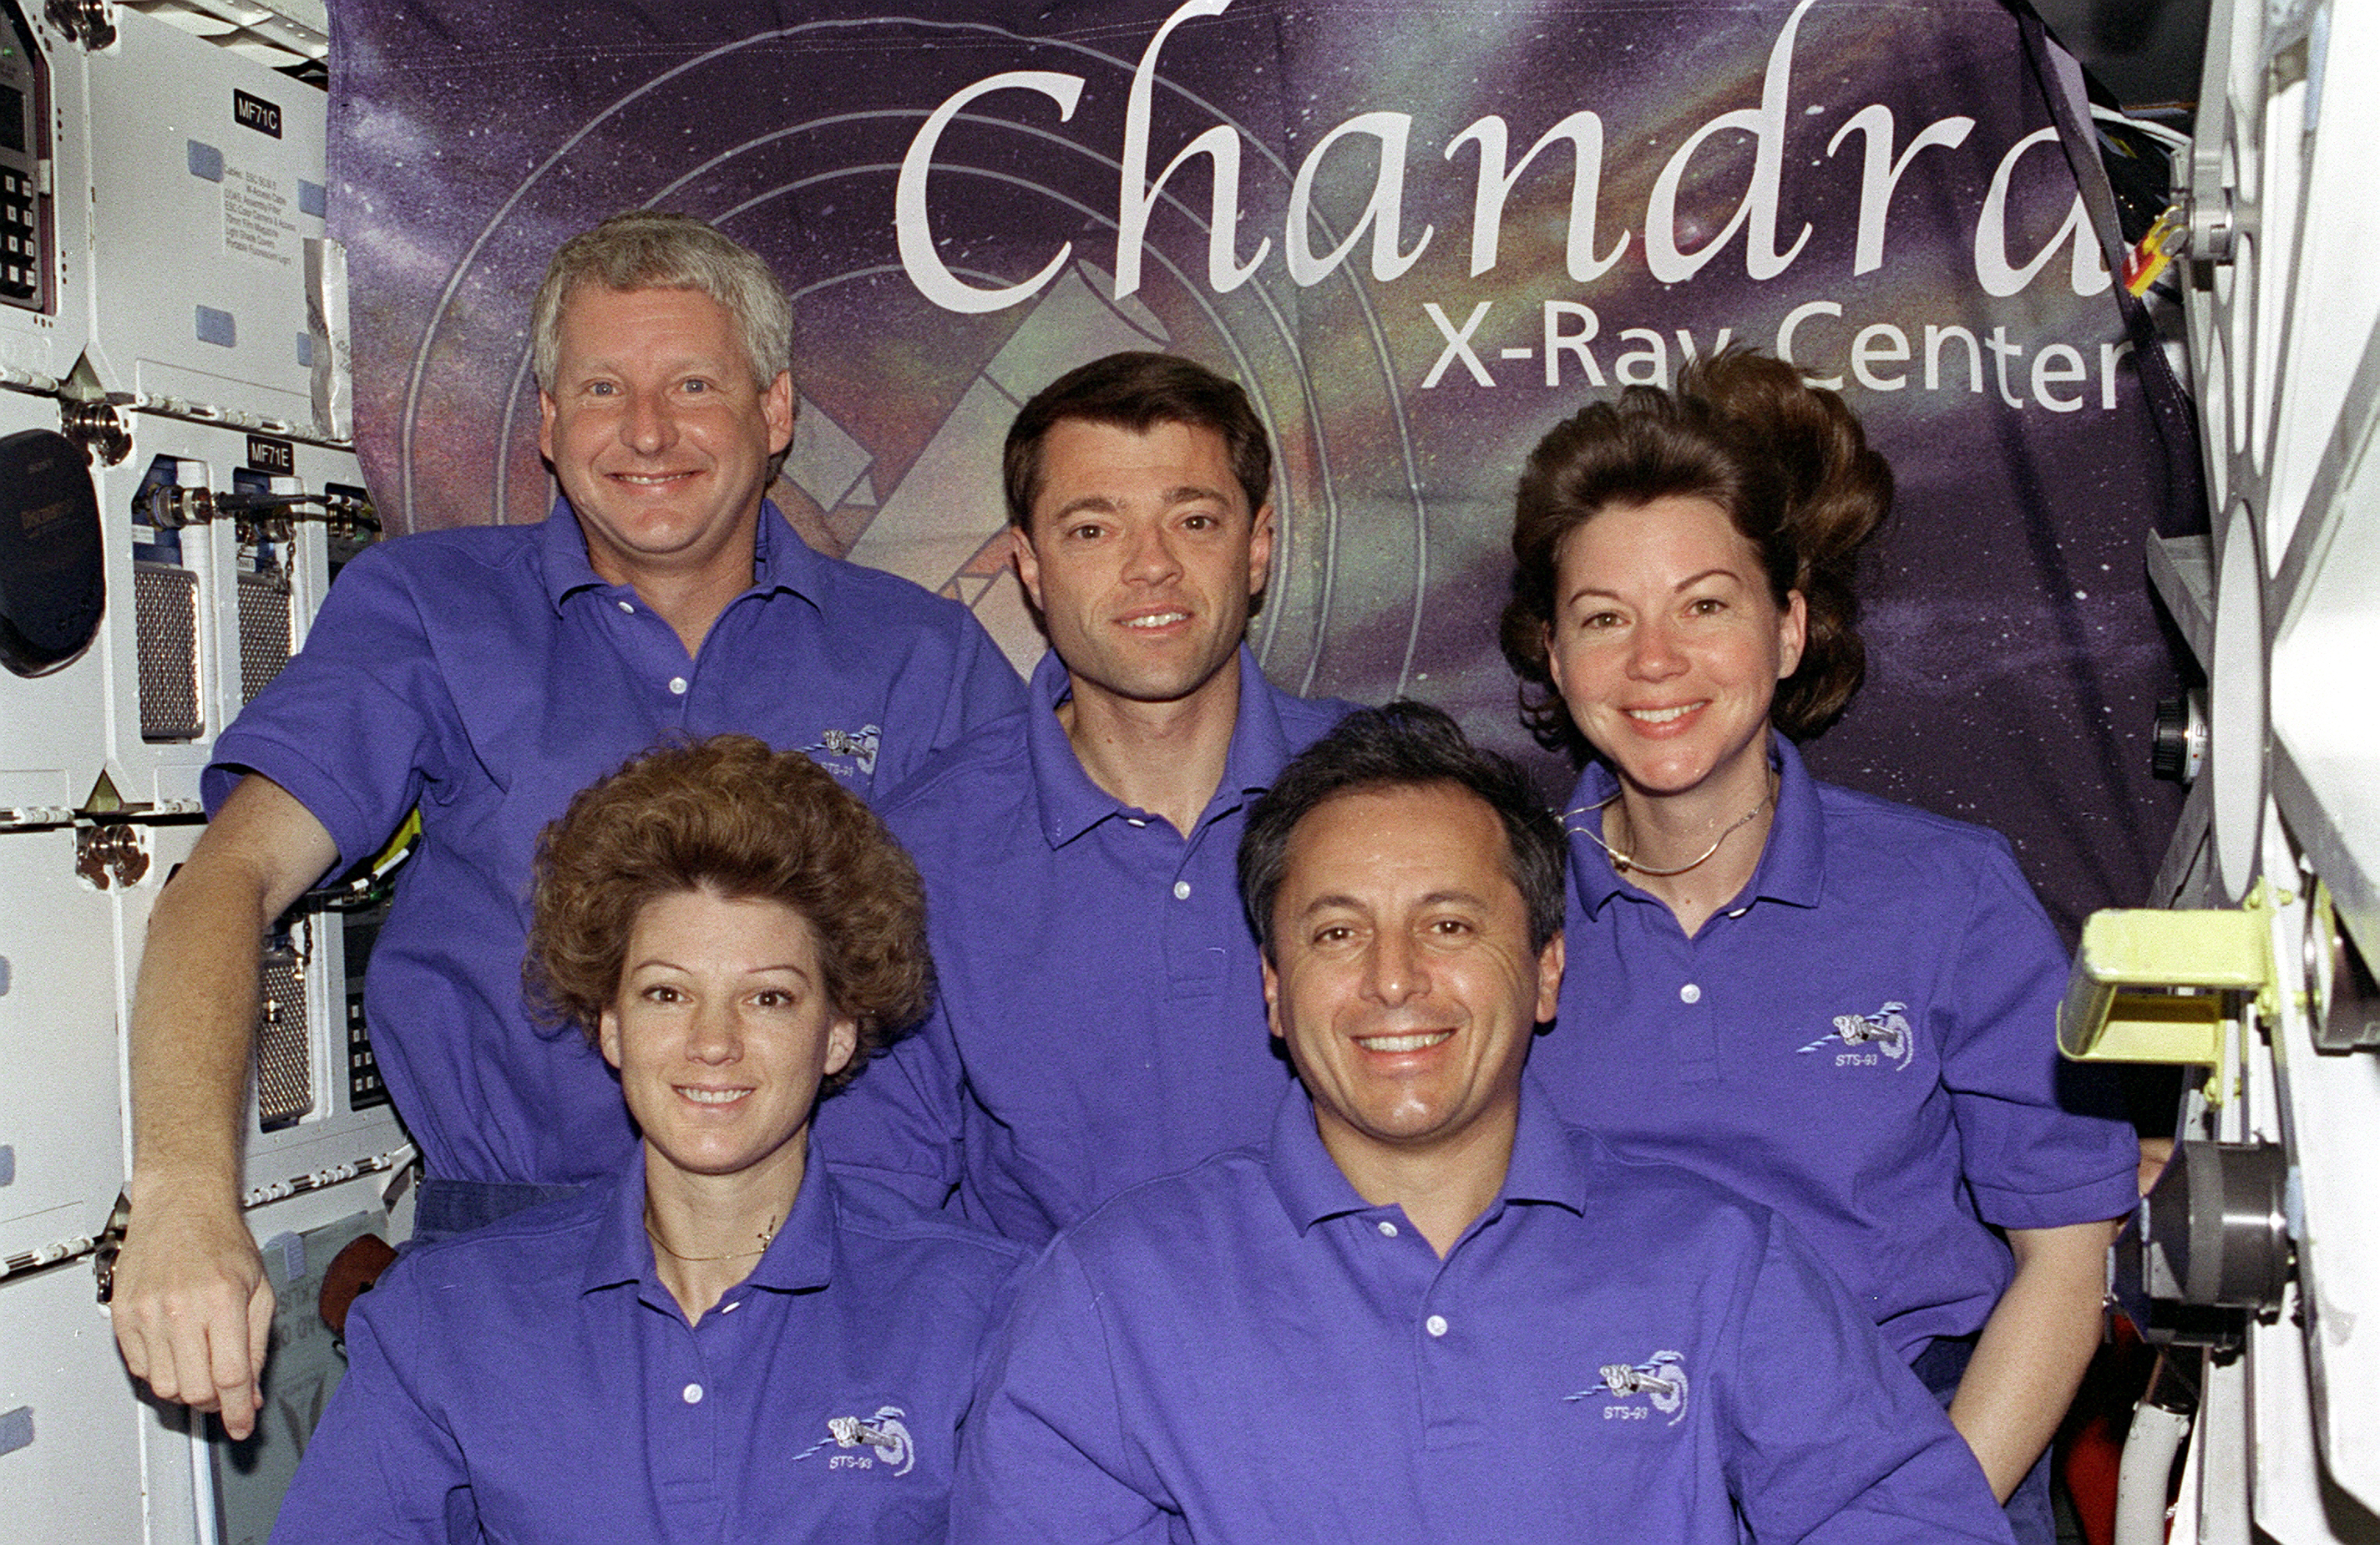 during chandra mission